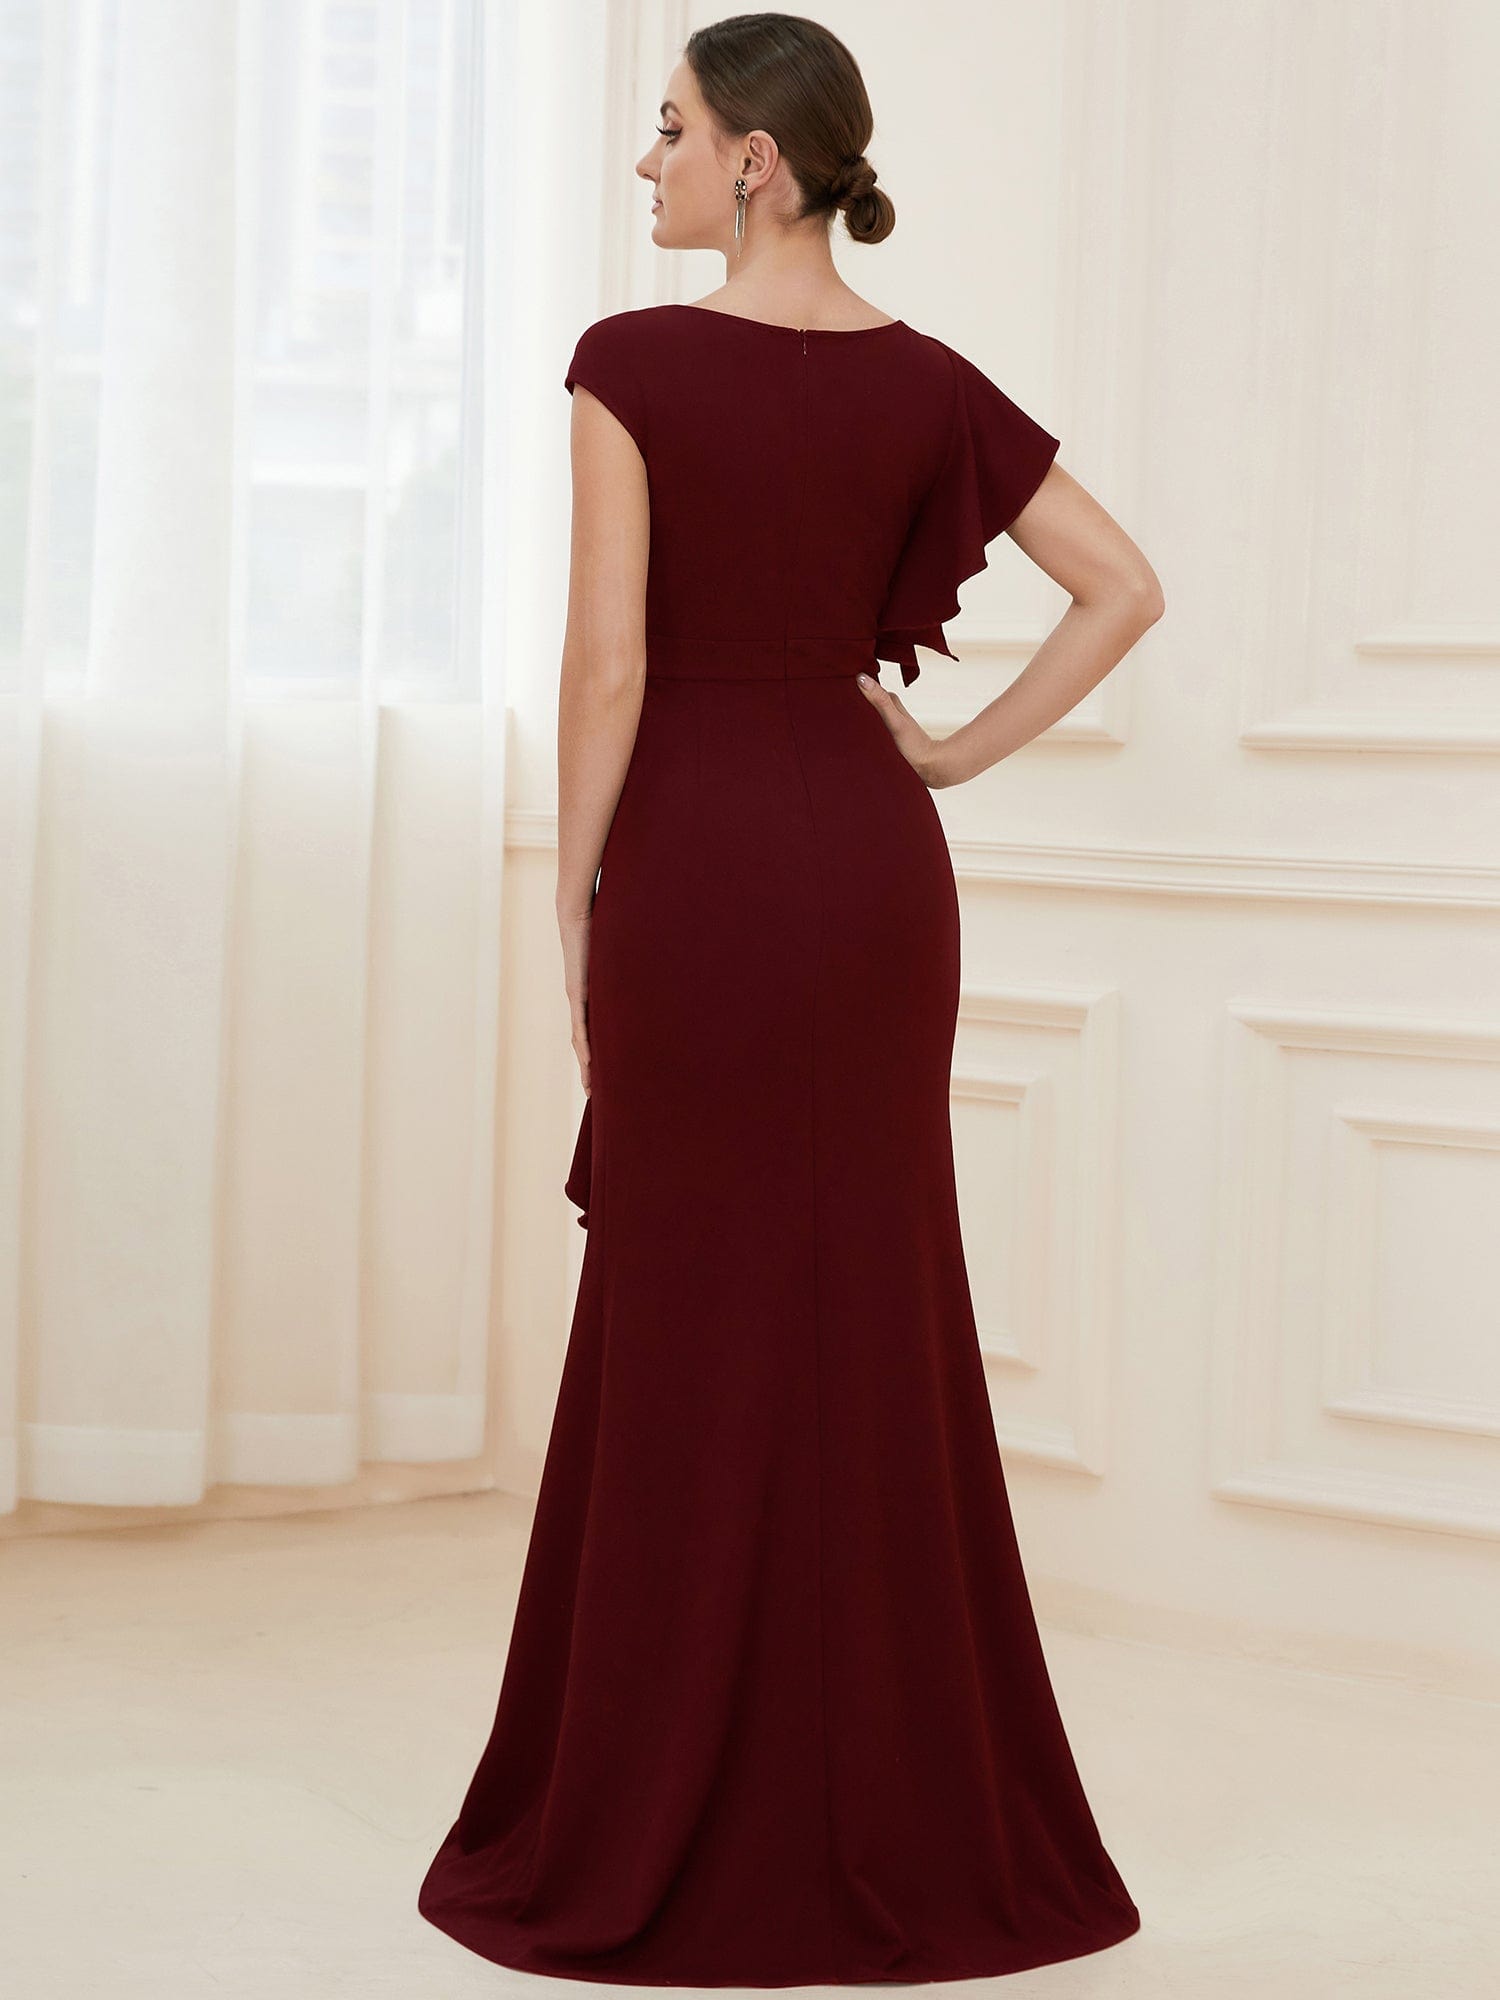 Elegant Cap Sleeve Side Slit Evening Gown with Ruffles #COLOR_Burgundy